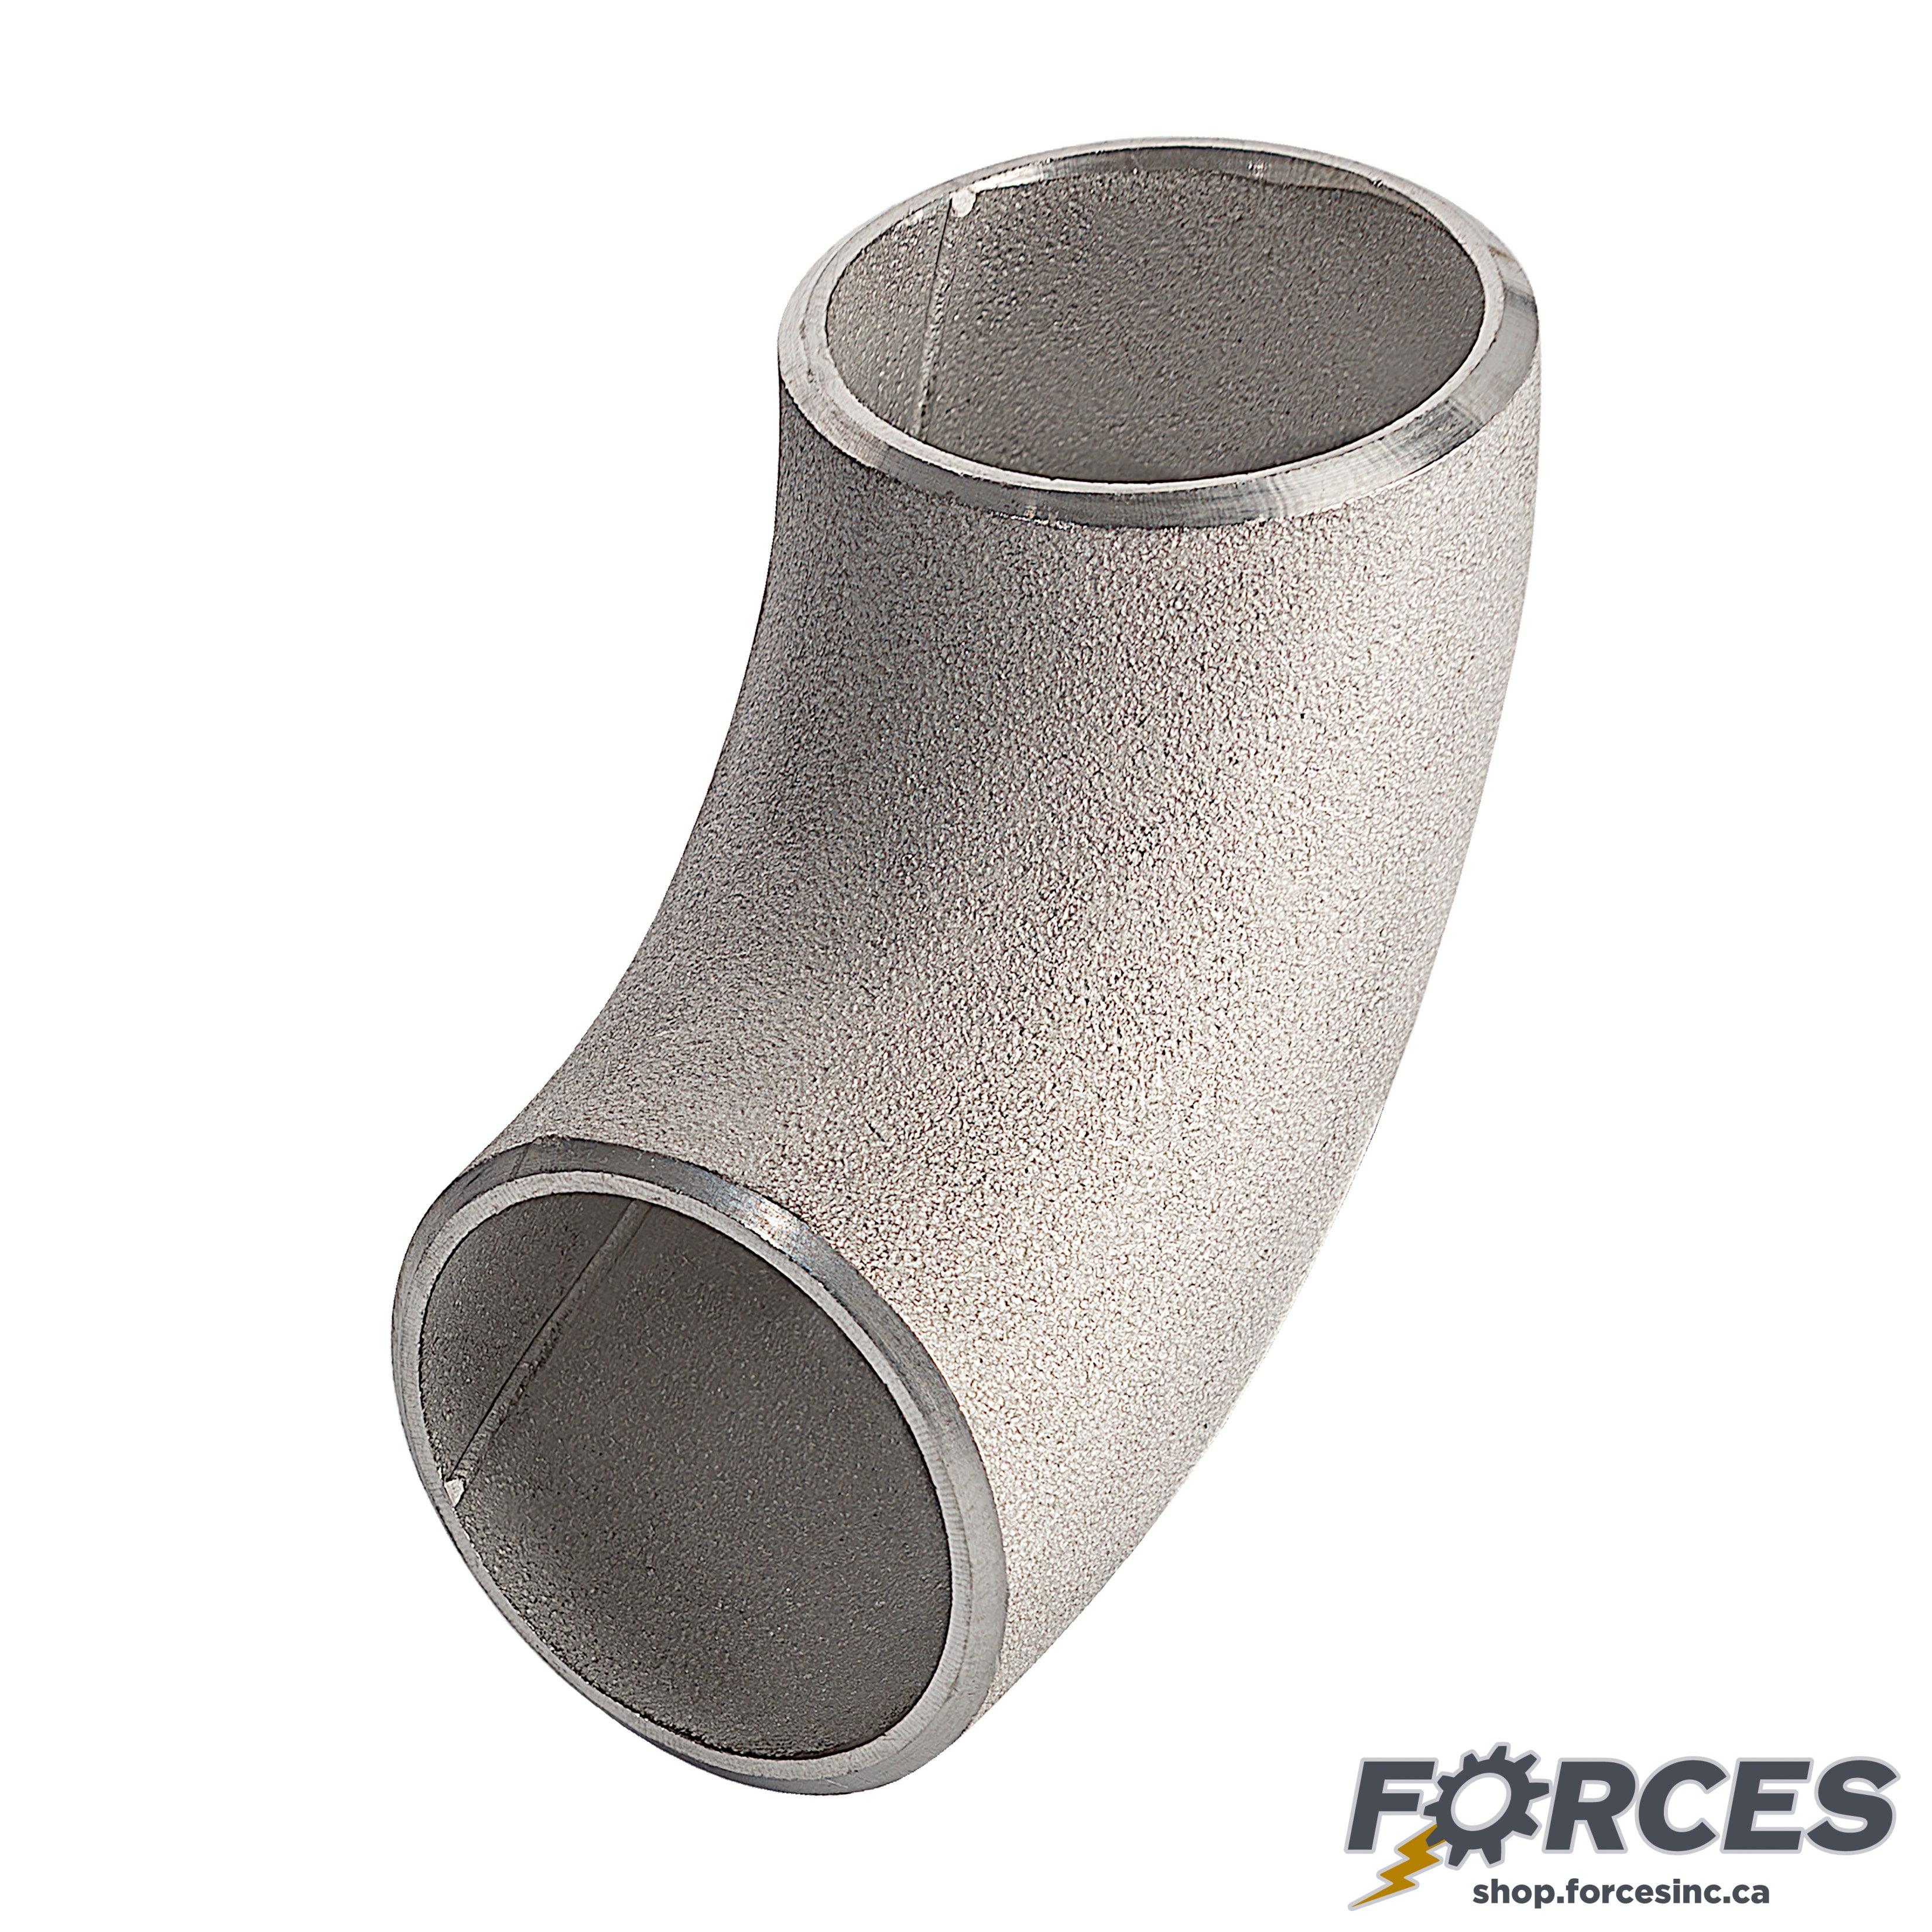 1-1/4" Elbow 90° SCH 40 Butt Weld - Stainless Steel 304 - Forces Inc